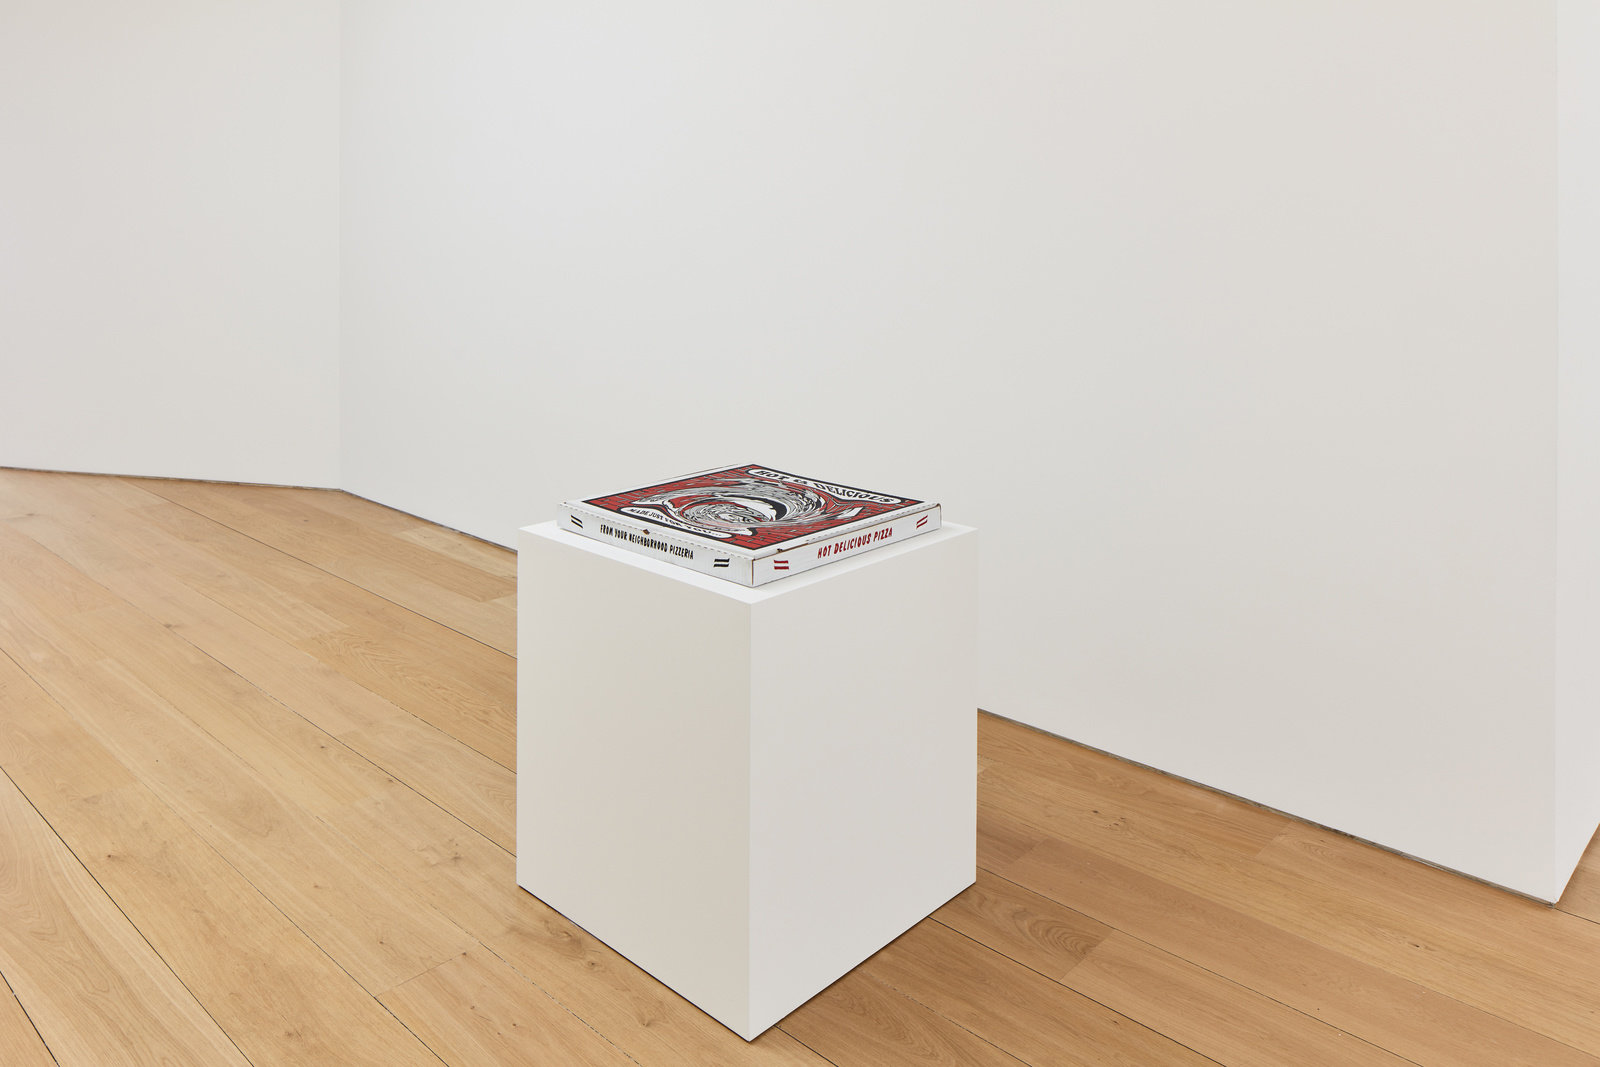 Johnson, black hole pizza box (installed), 2018, carved wood with paint, 26 x 25 1 4 x 5 in., 66 x 64.1 x 12.7 cm, cnon 59.829